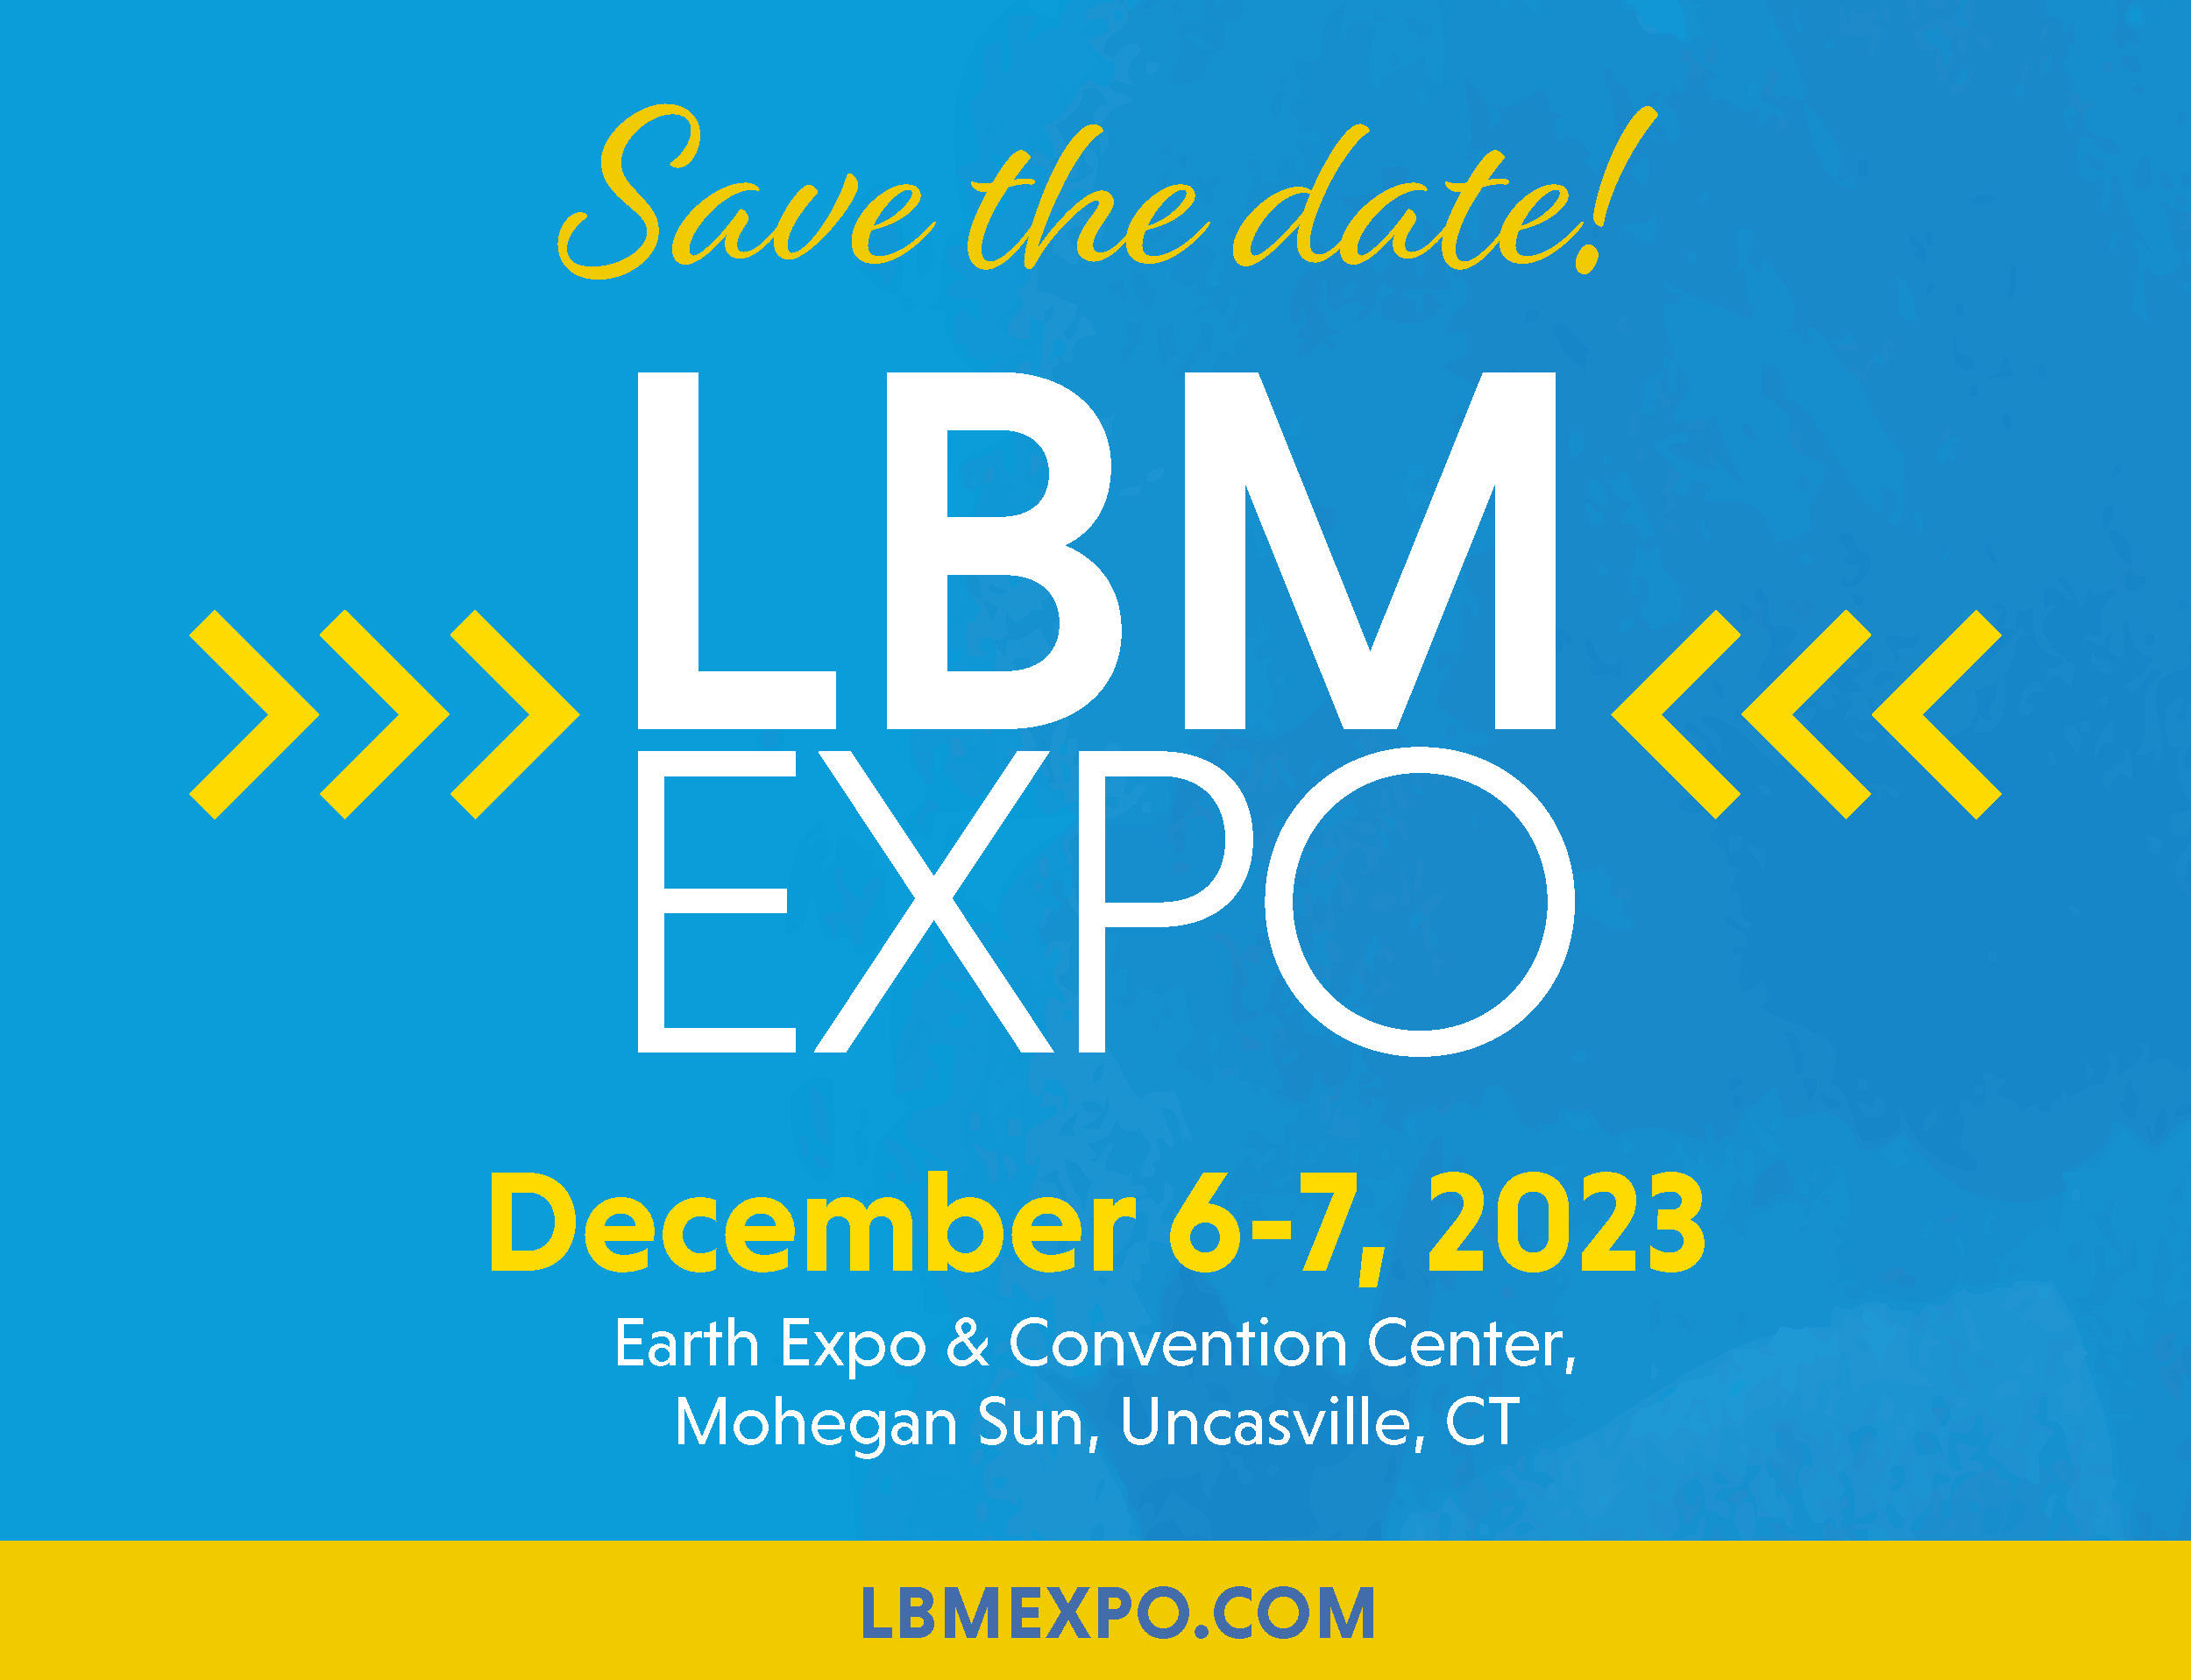 LBM Expo 2023 Save the Date, December 6-7, 2023